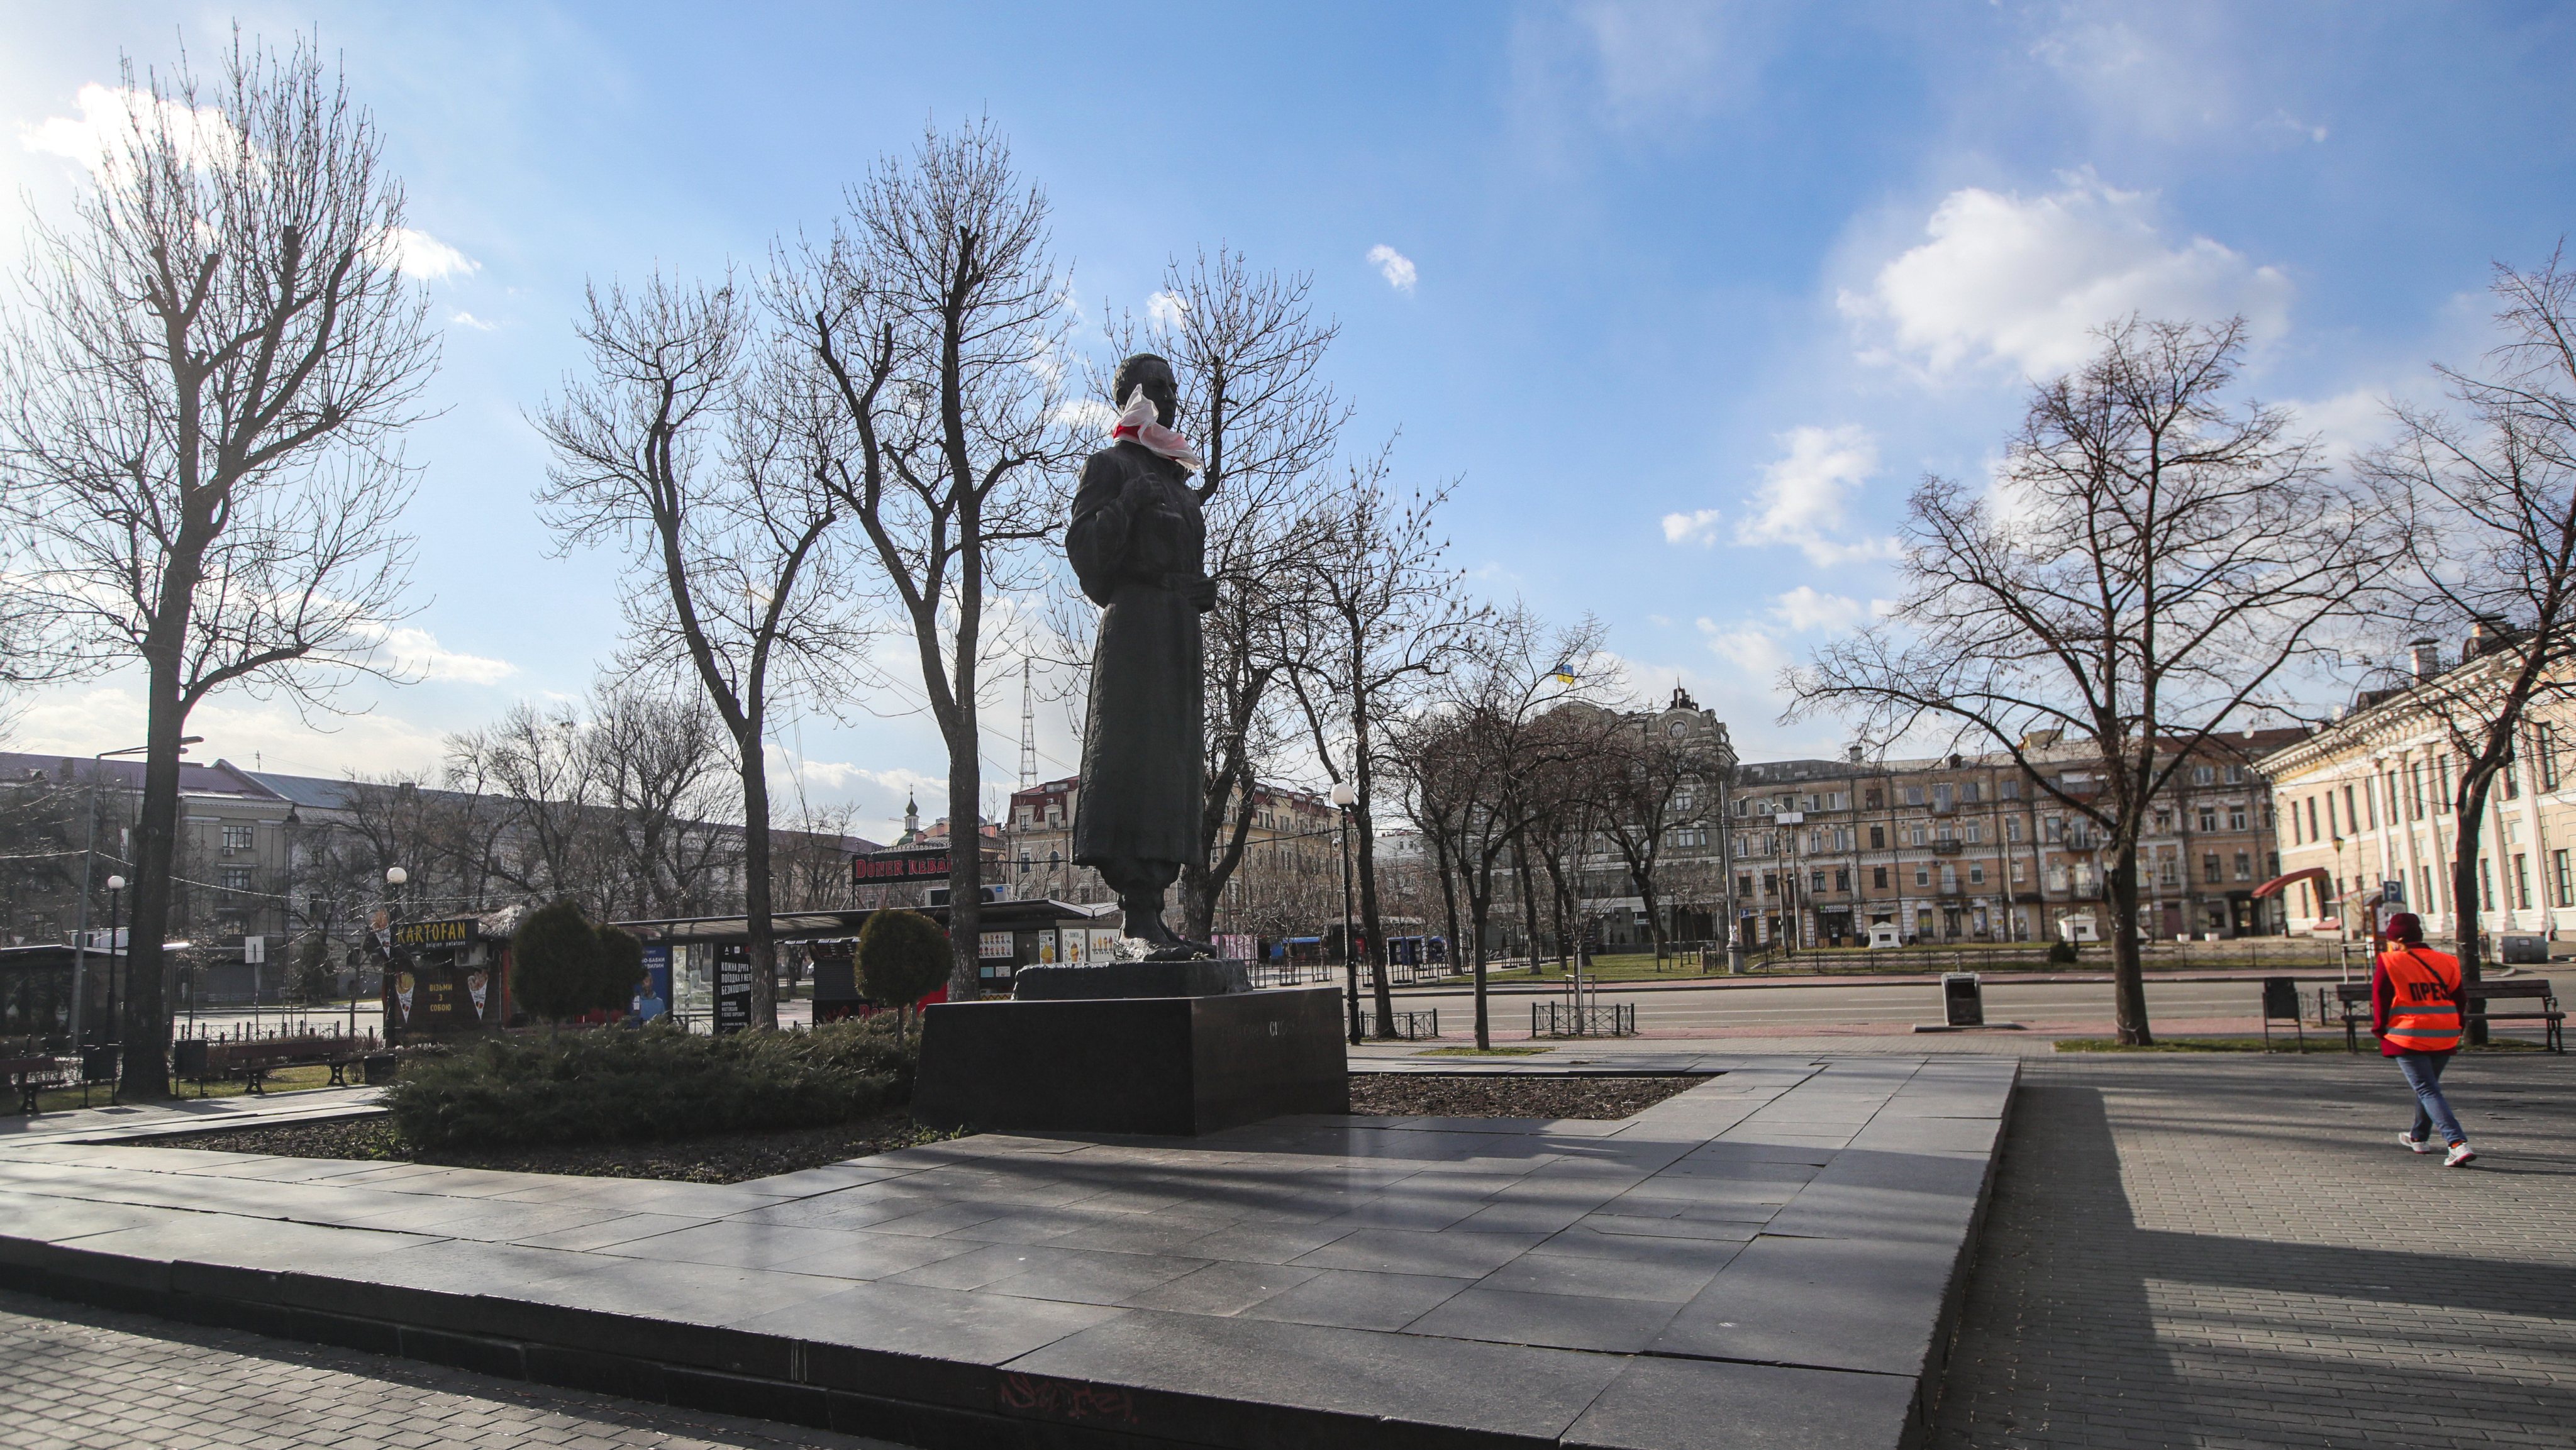 Preservation of Kyiv monuments